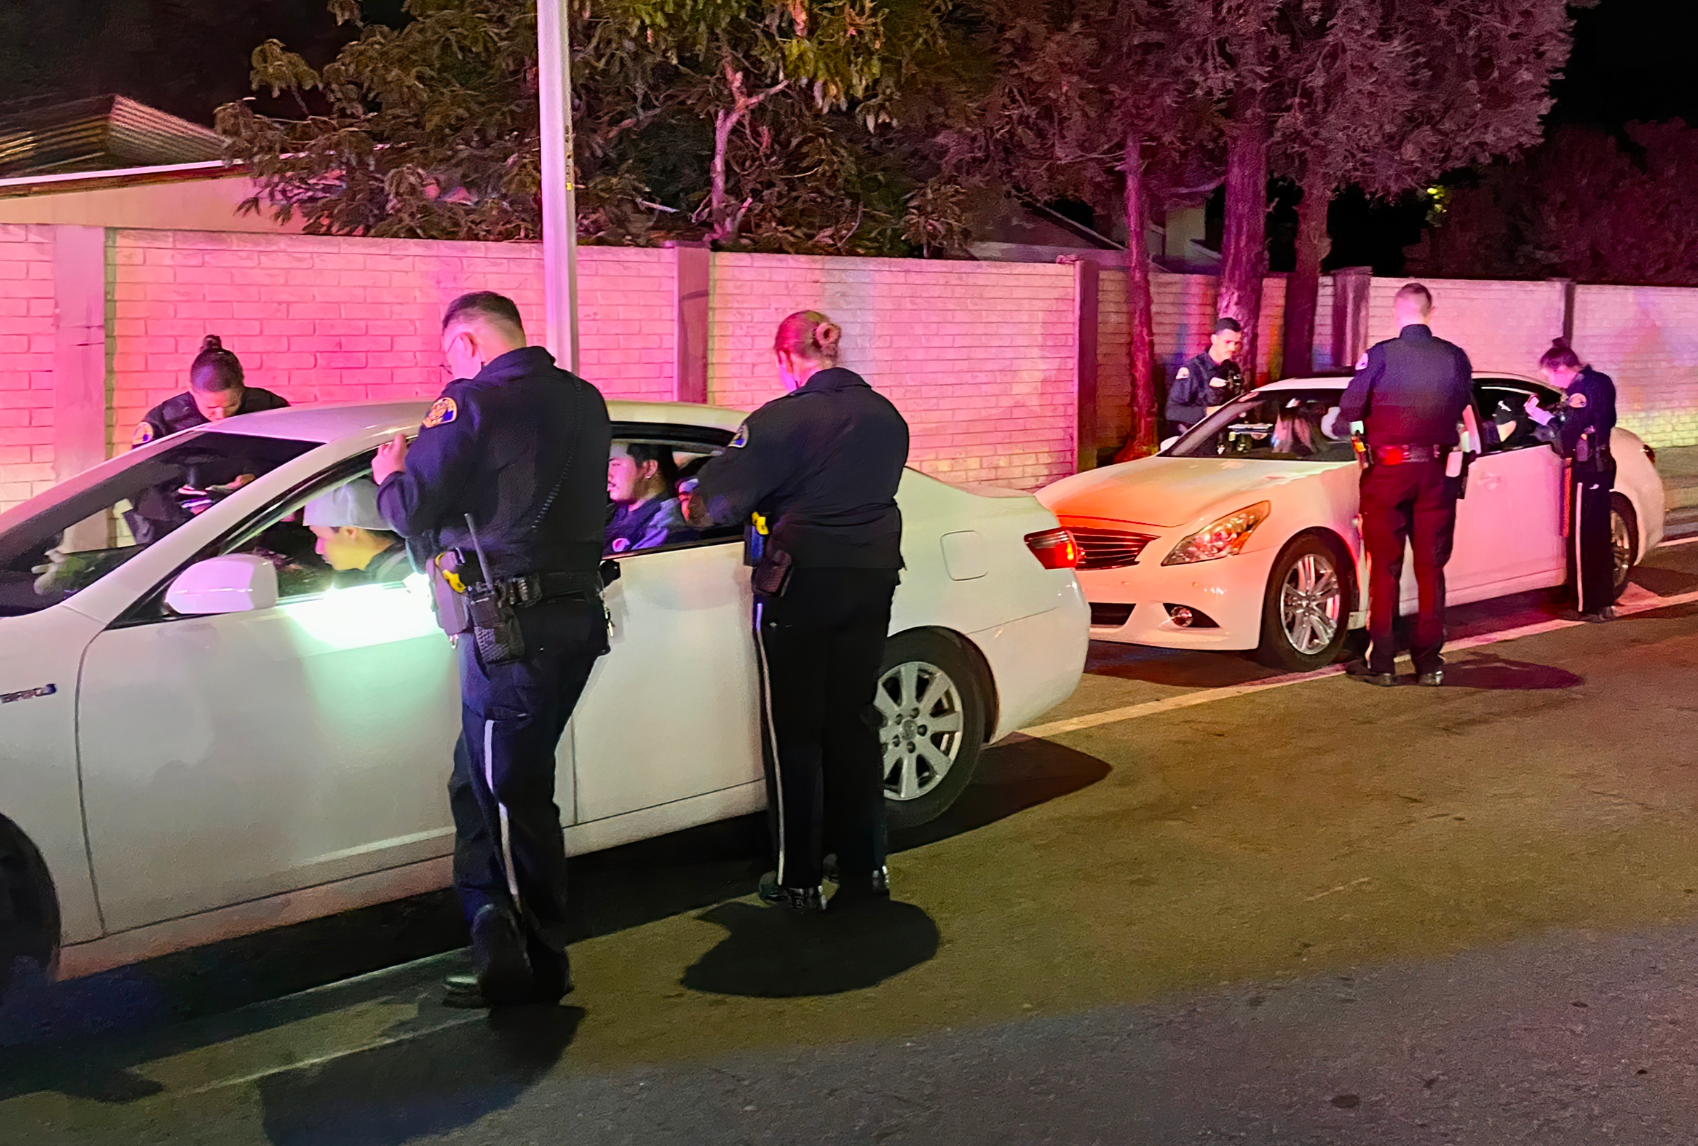 Two police officers in uniform shine a flashlight into a parked white sedan parked next to a large wall at nighttime.